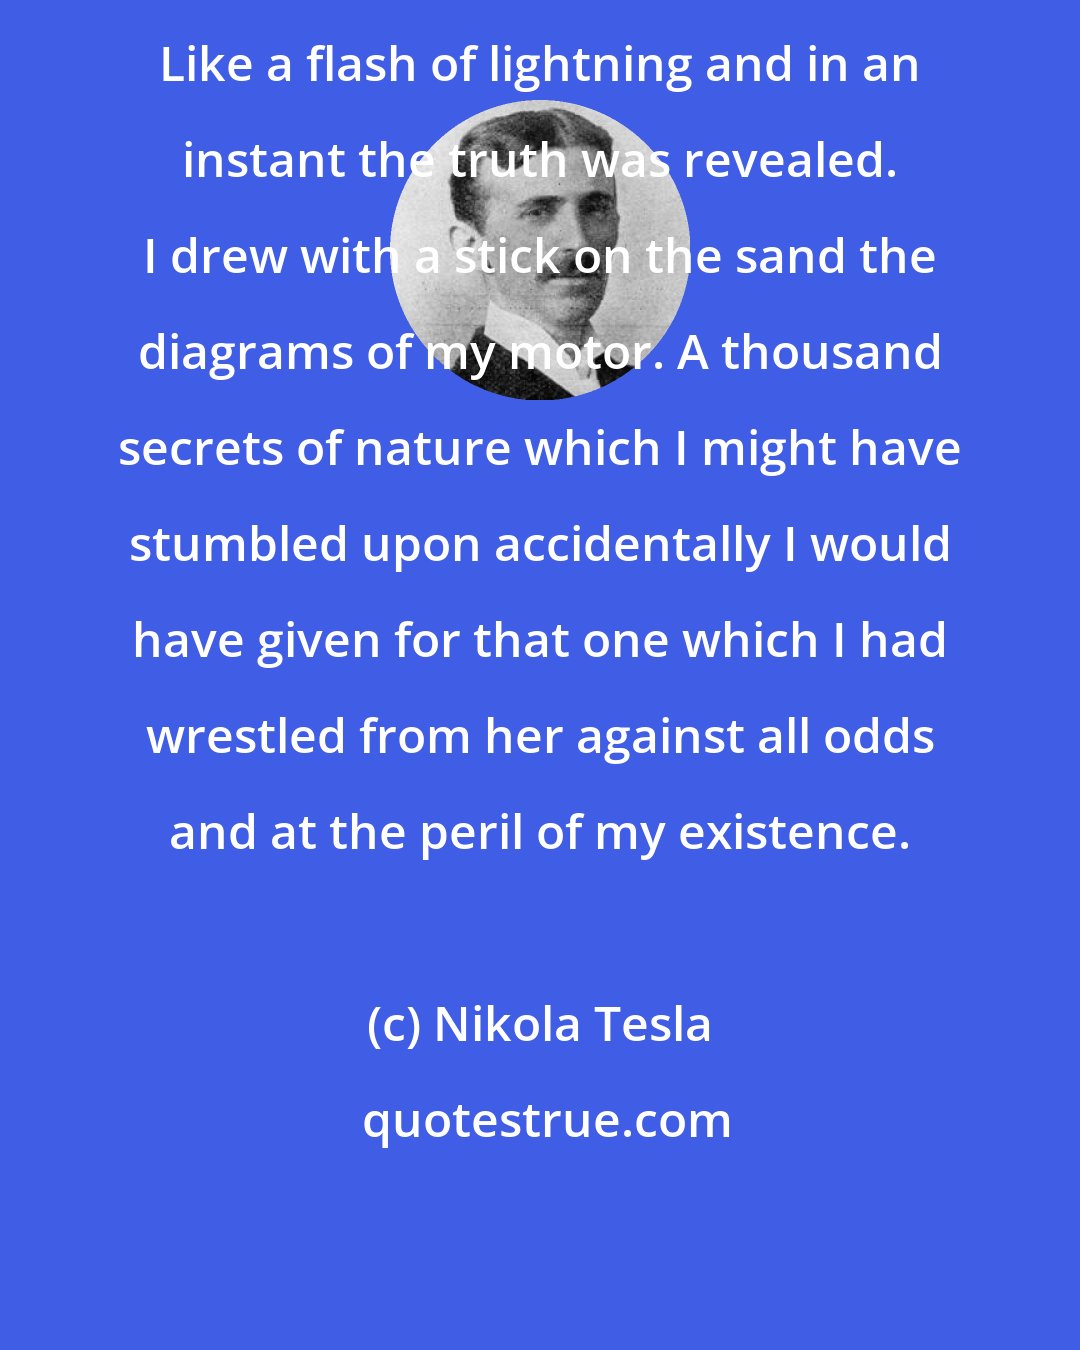 Nikola Tesla: Like a flash of lightning and in an instant the truth was revealed. I drew with a stick on the sand the diagrams of my motor. A thousand secrets of nature which I might have stumbled upon accidentally I would have given for that one which I had wrestled from her against all odds and at the peril of my existence.